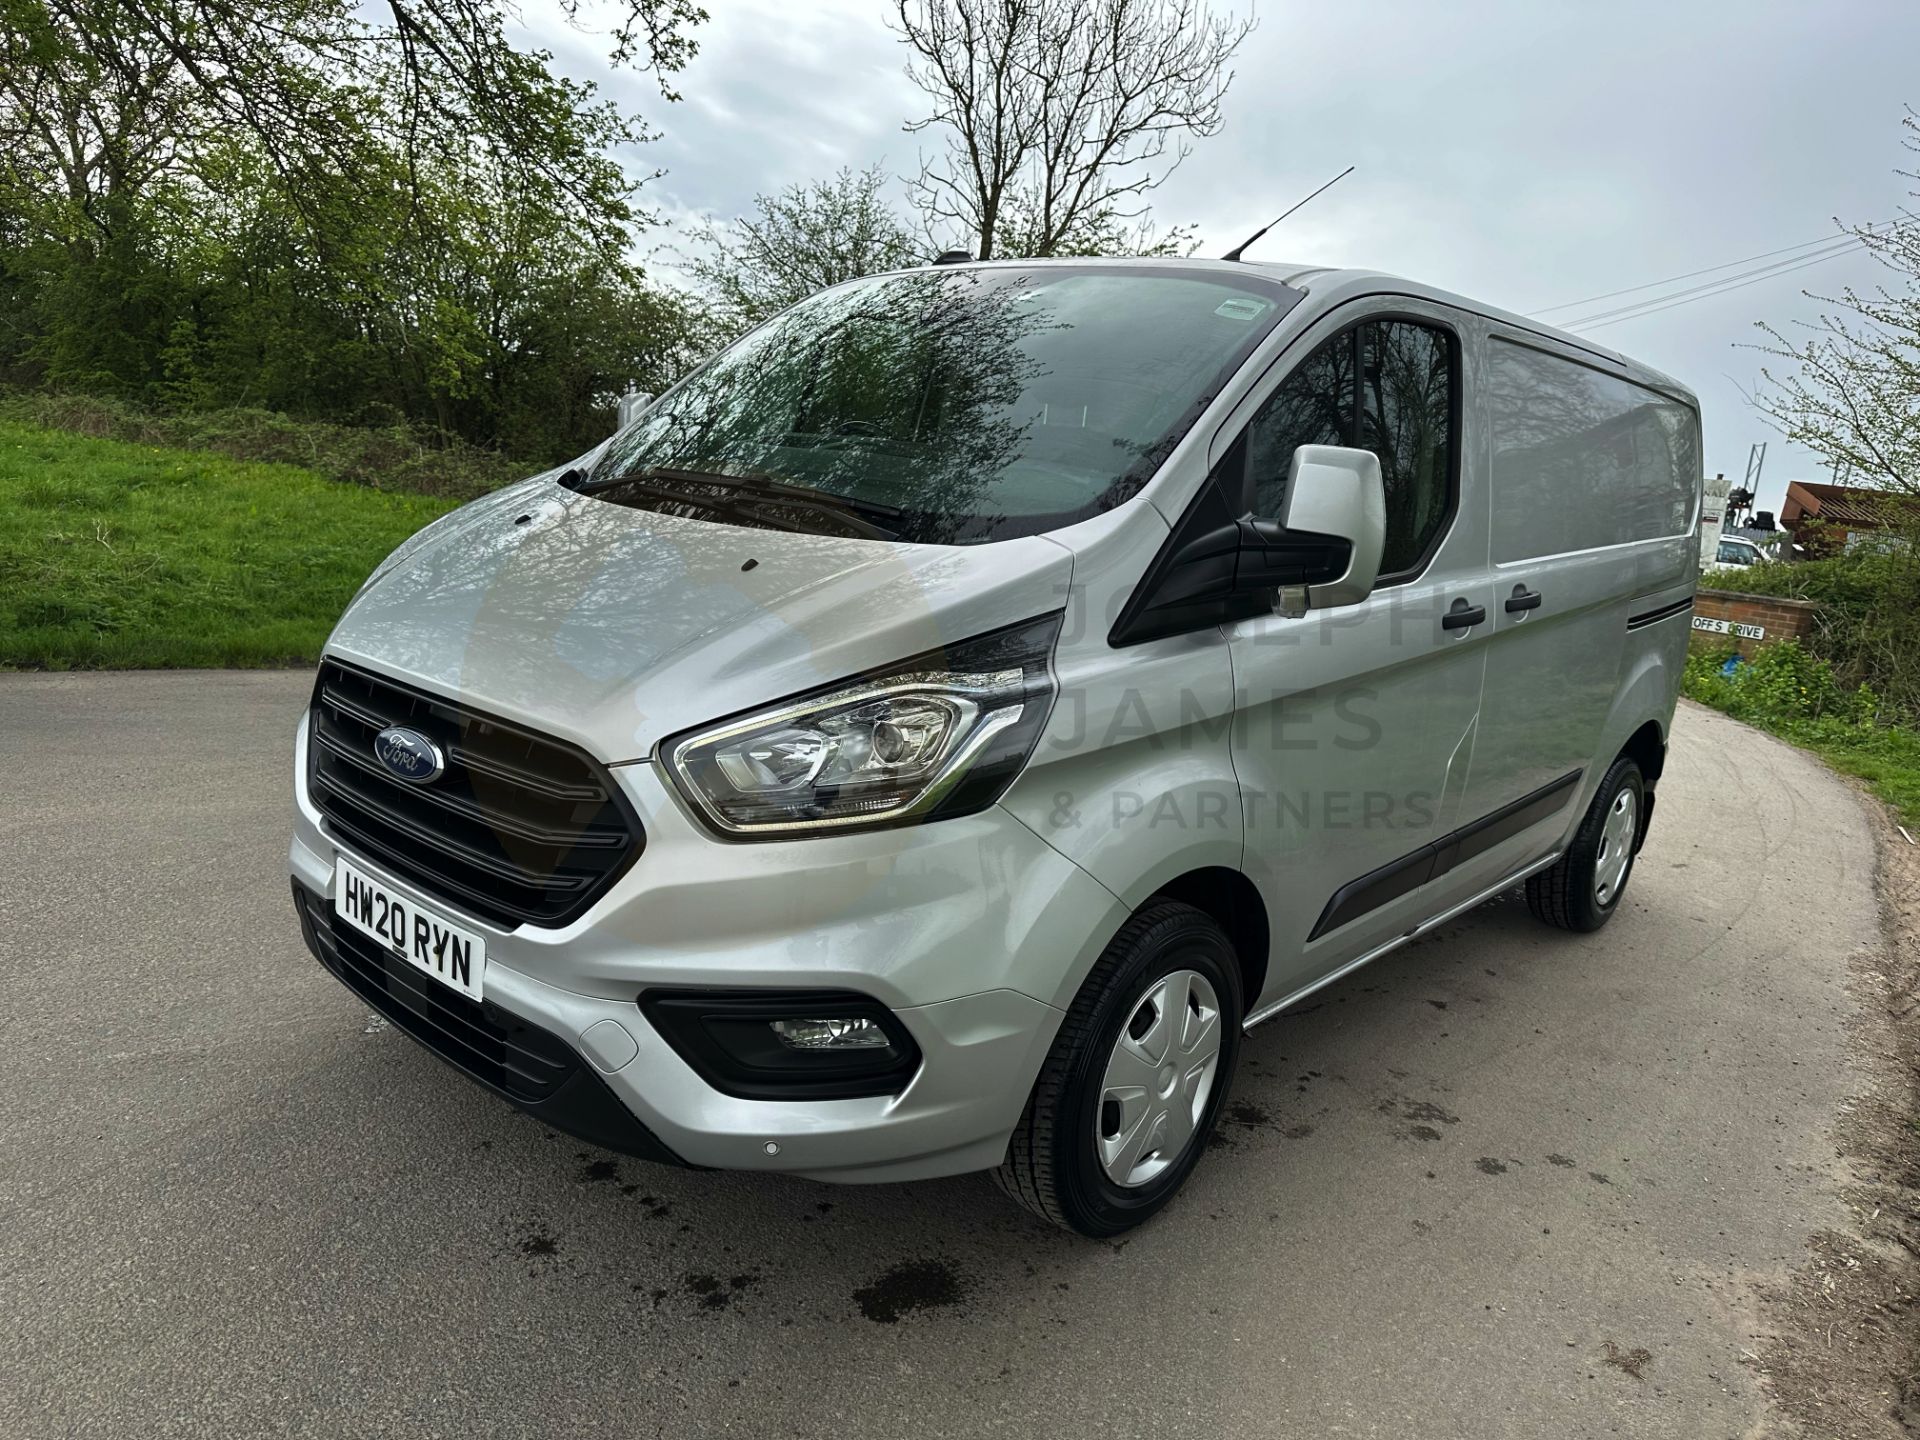 (ON SALE) FORD TRANSIT CUSTOM "TREND" 2.0TDCI (130) 20 REG -1 OWNER- SILVER -GREAT SPEC -LOW MILEAGE - Image 5 of 38